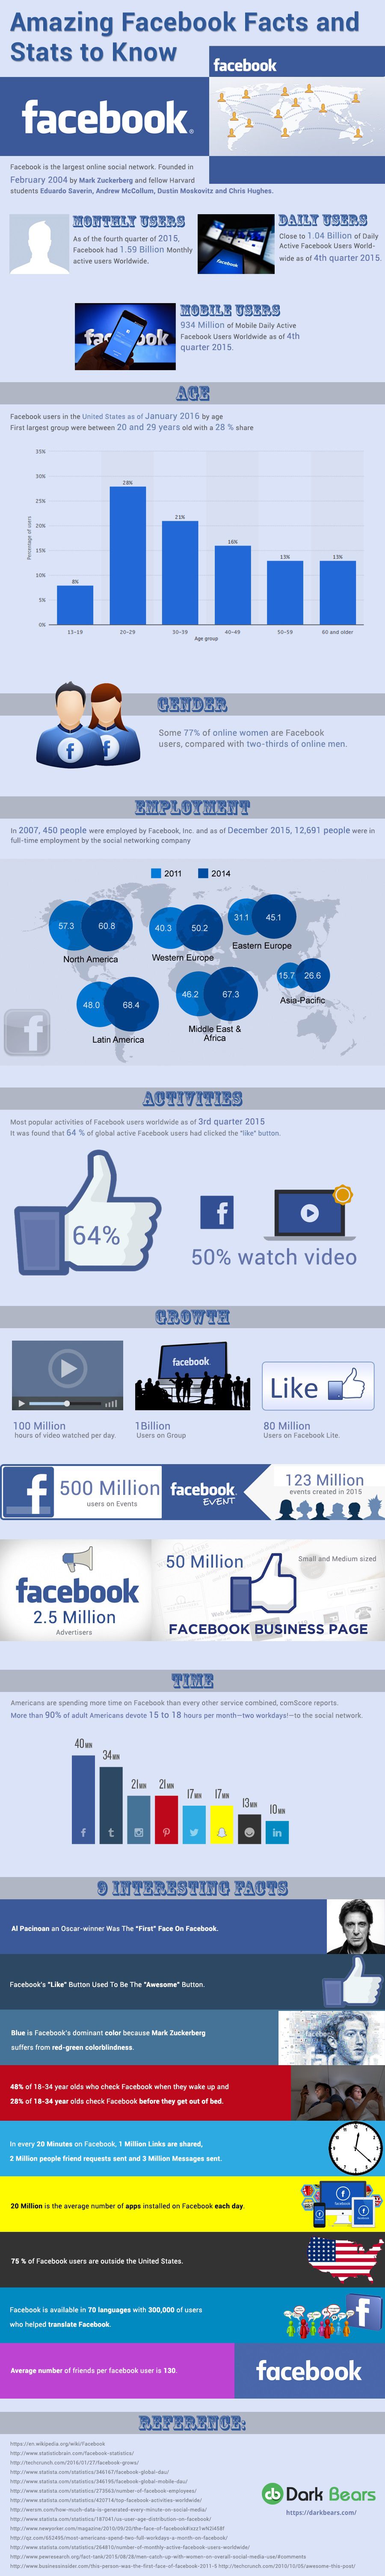 Amazing-Facebook-Facts-and-Stats-to-Know-an infographic